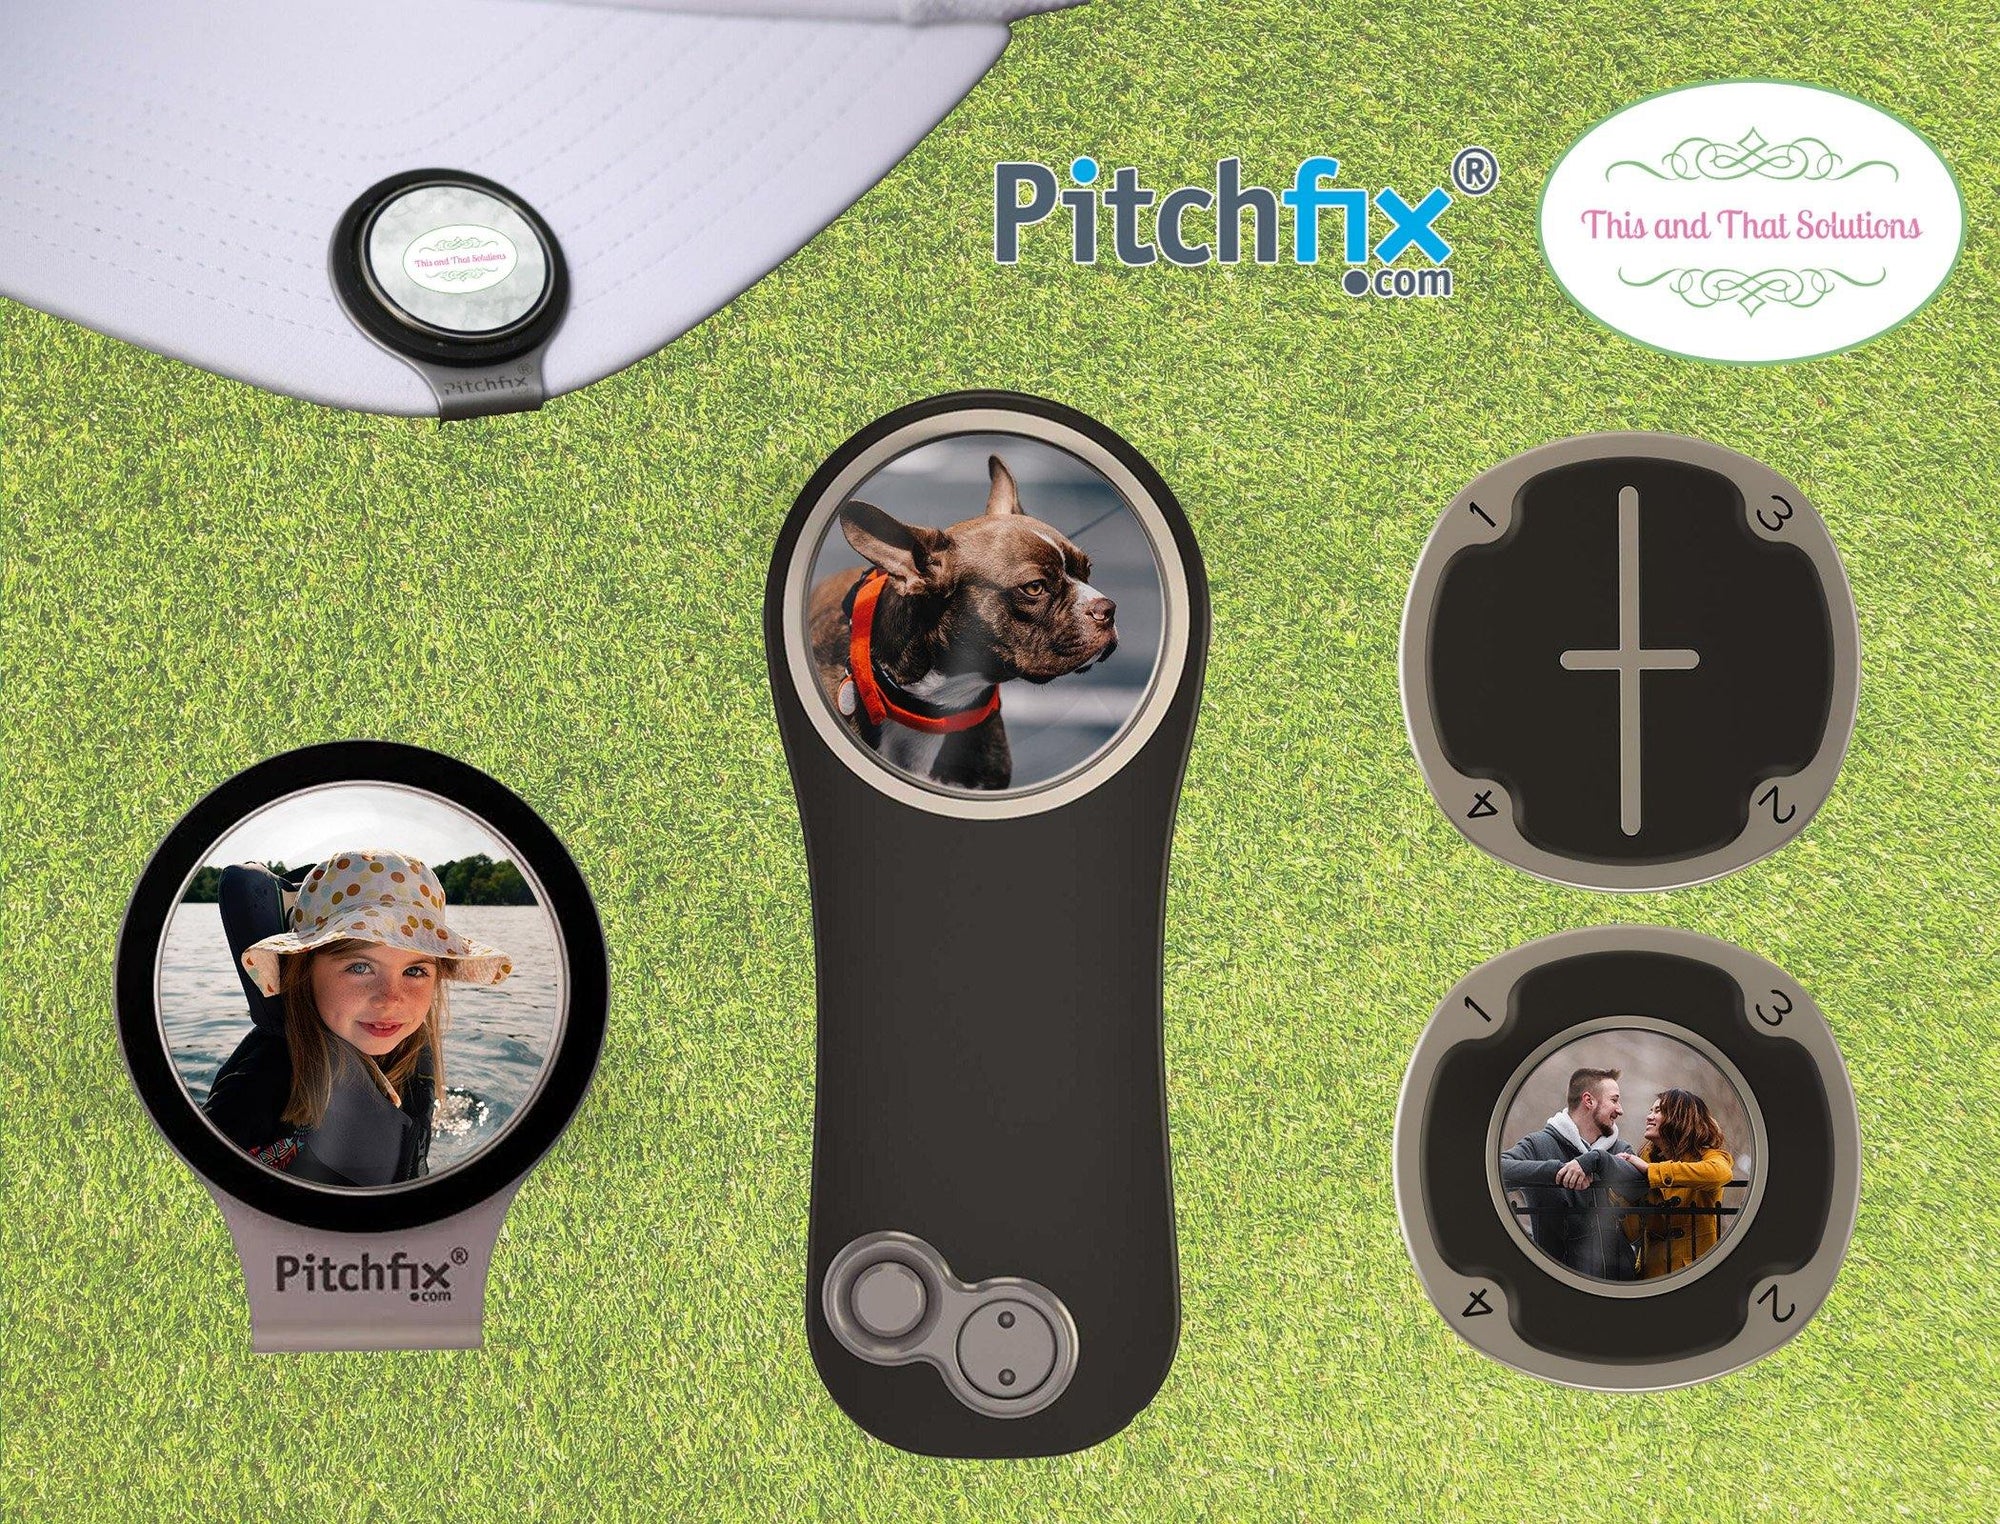 Personalized Pitchfix Products - This & That Solutions - Personalized Gifts & Custom Home Decor